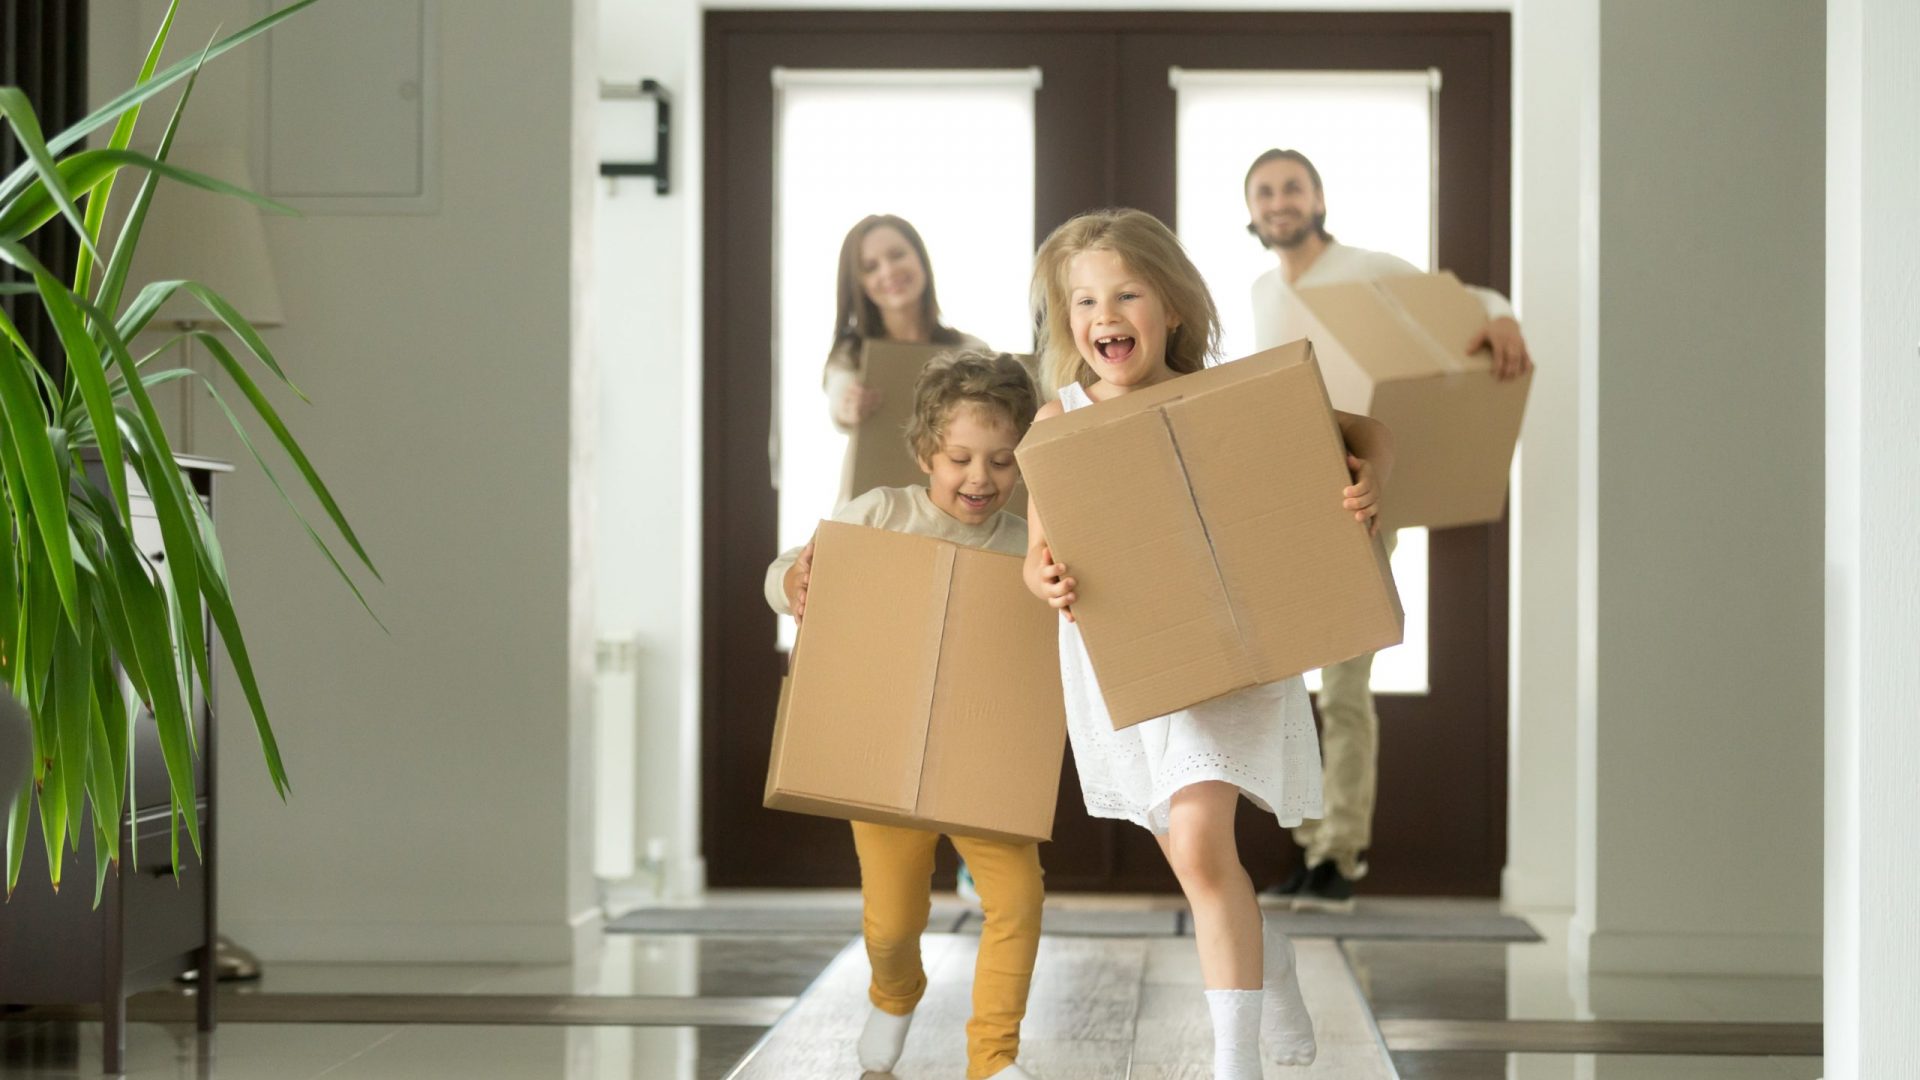 kids running while moving boxes